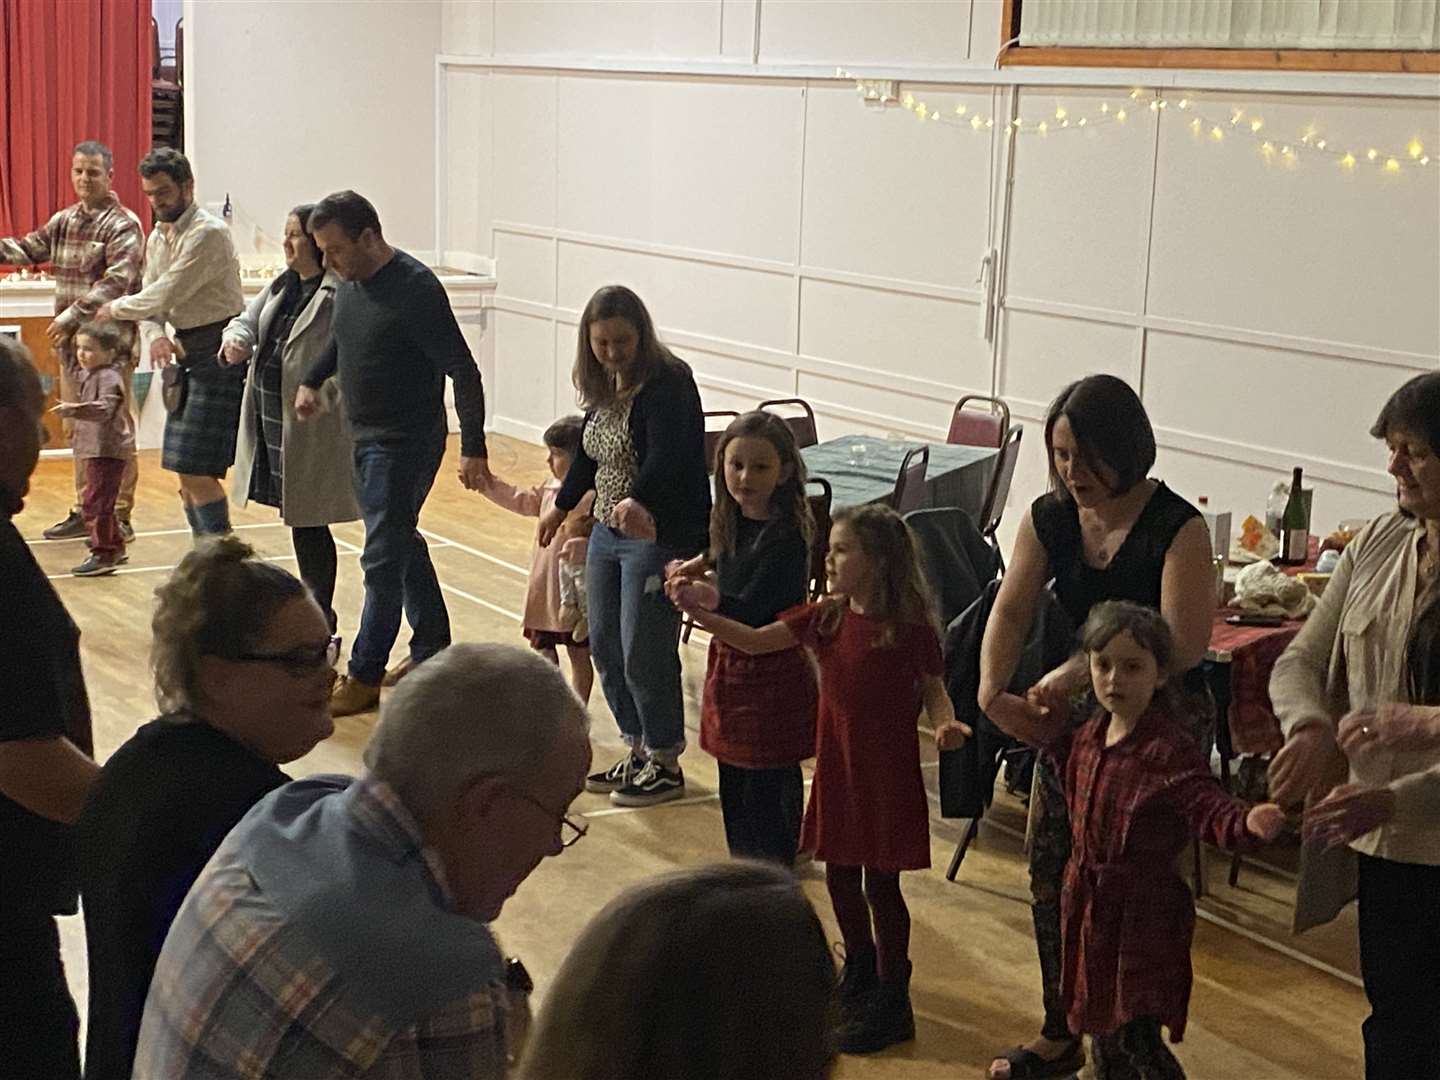 The family friendly ceilidh was a huge success.